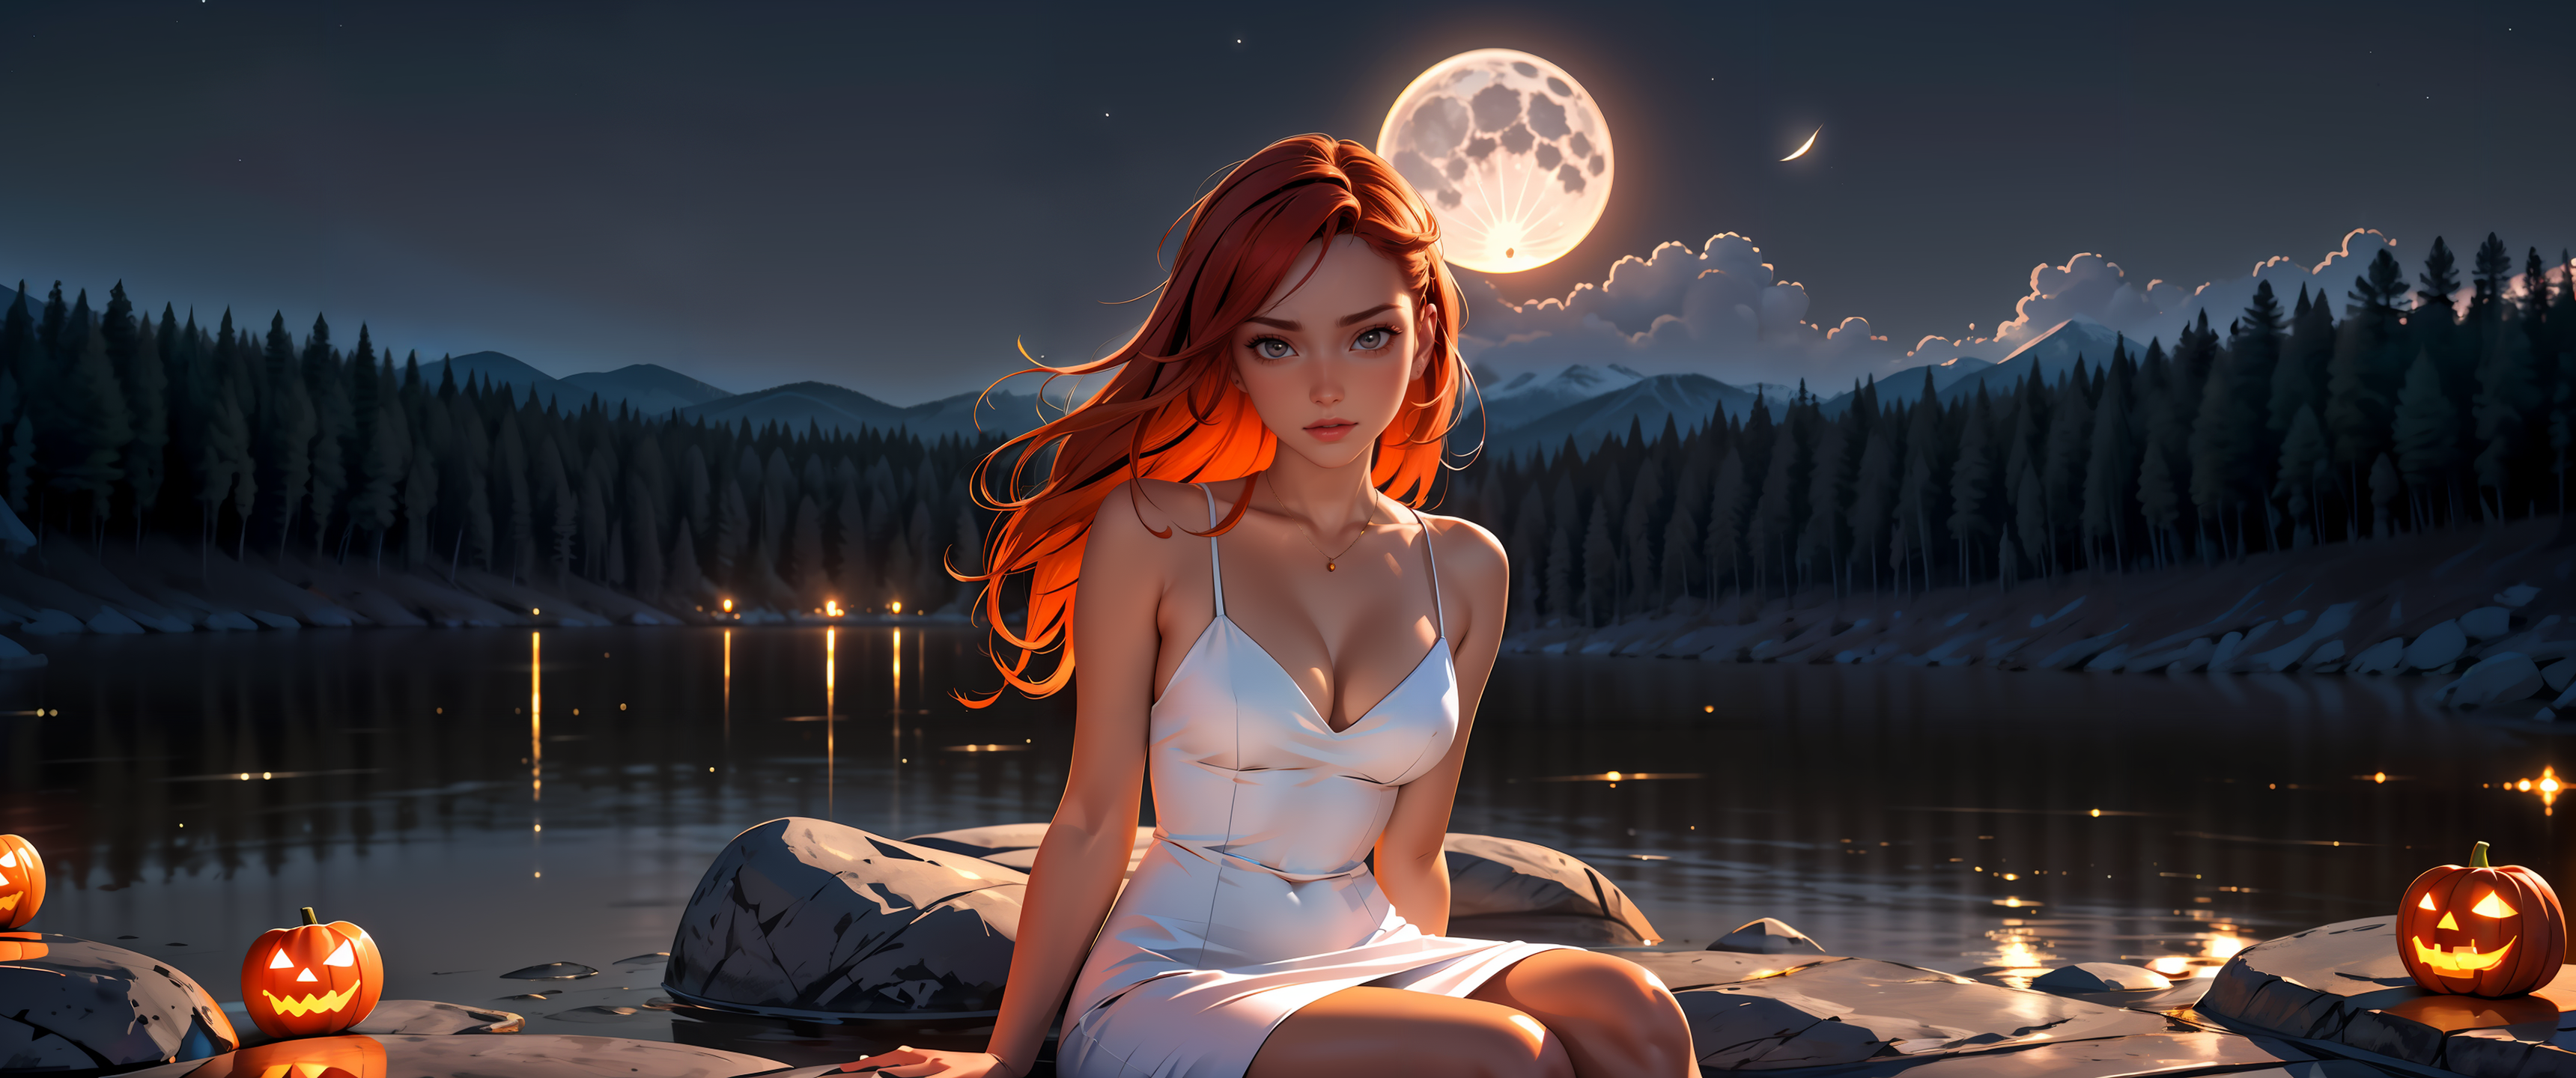 General 3440x1440 Halloween lake white dress night full moon forest Jack O' Lantern redhead Stable Diffusion AI art girl sitting on ground Moon pumpkin long hair cleavage necklace looking at viewer trees big boobs moonlight water reflection sky digital art clouds